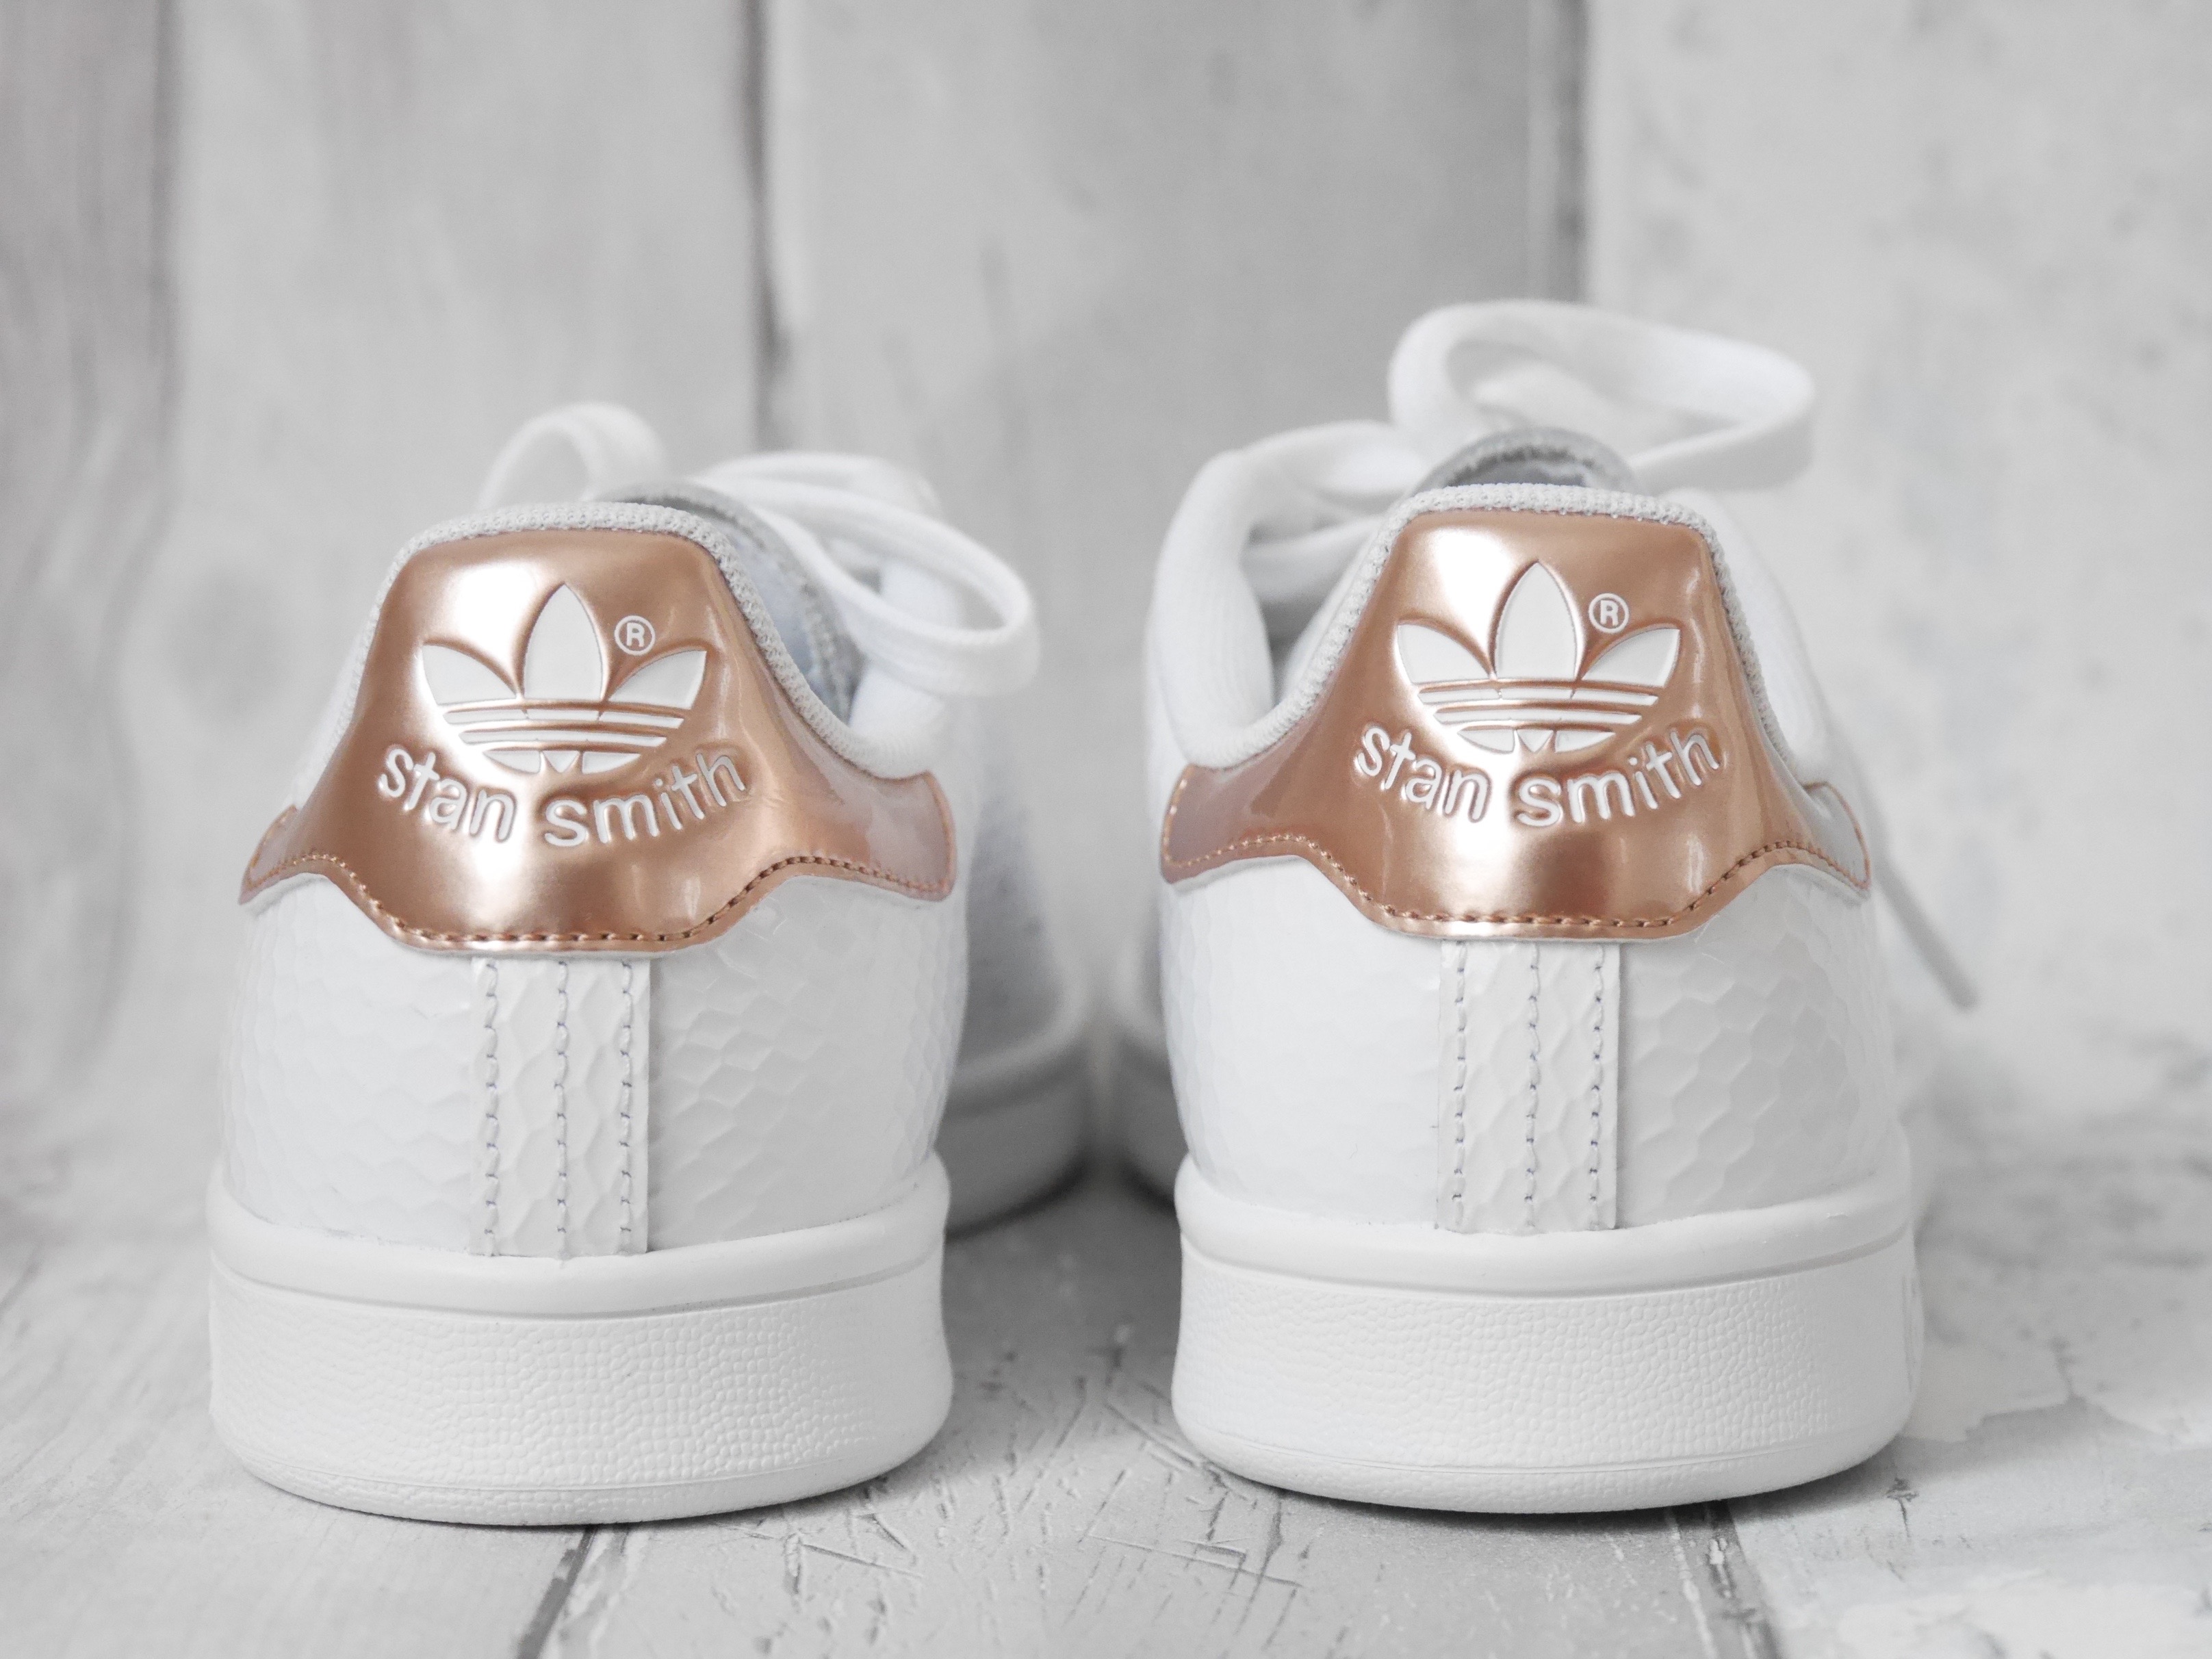 stan smith femme rose gold